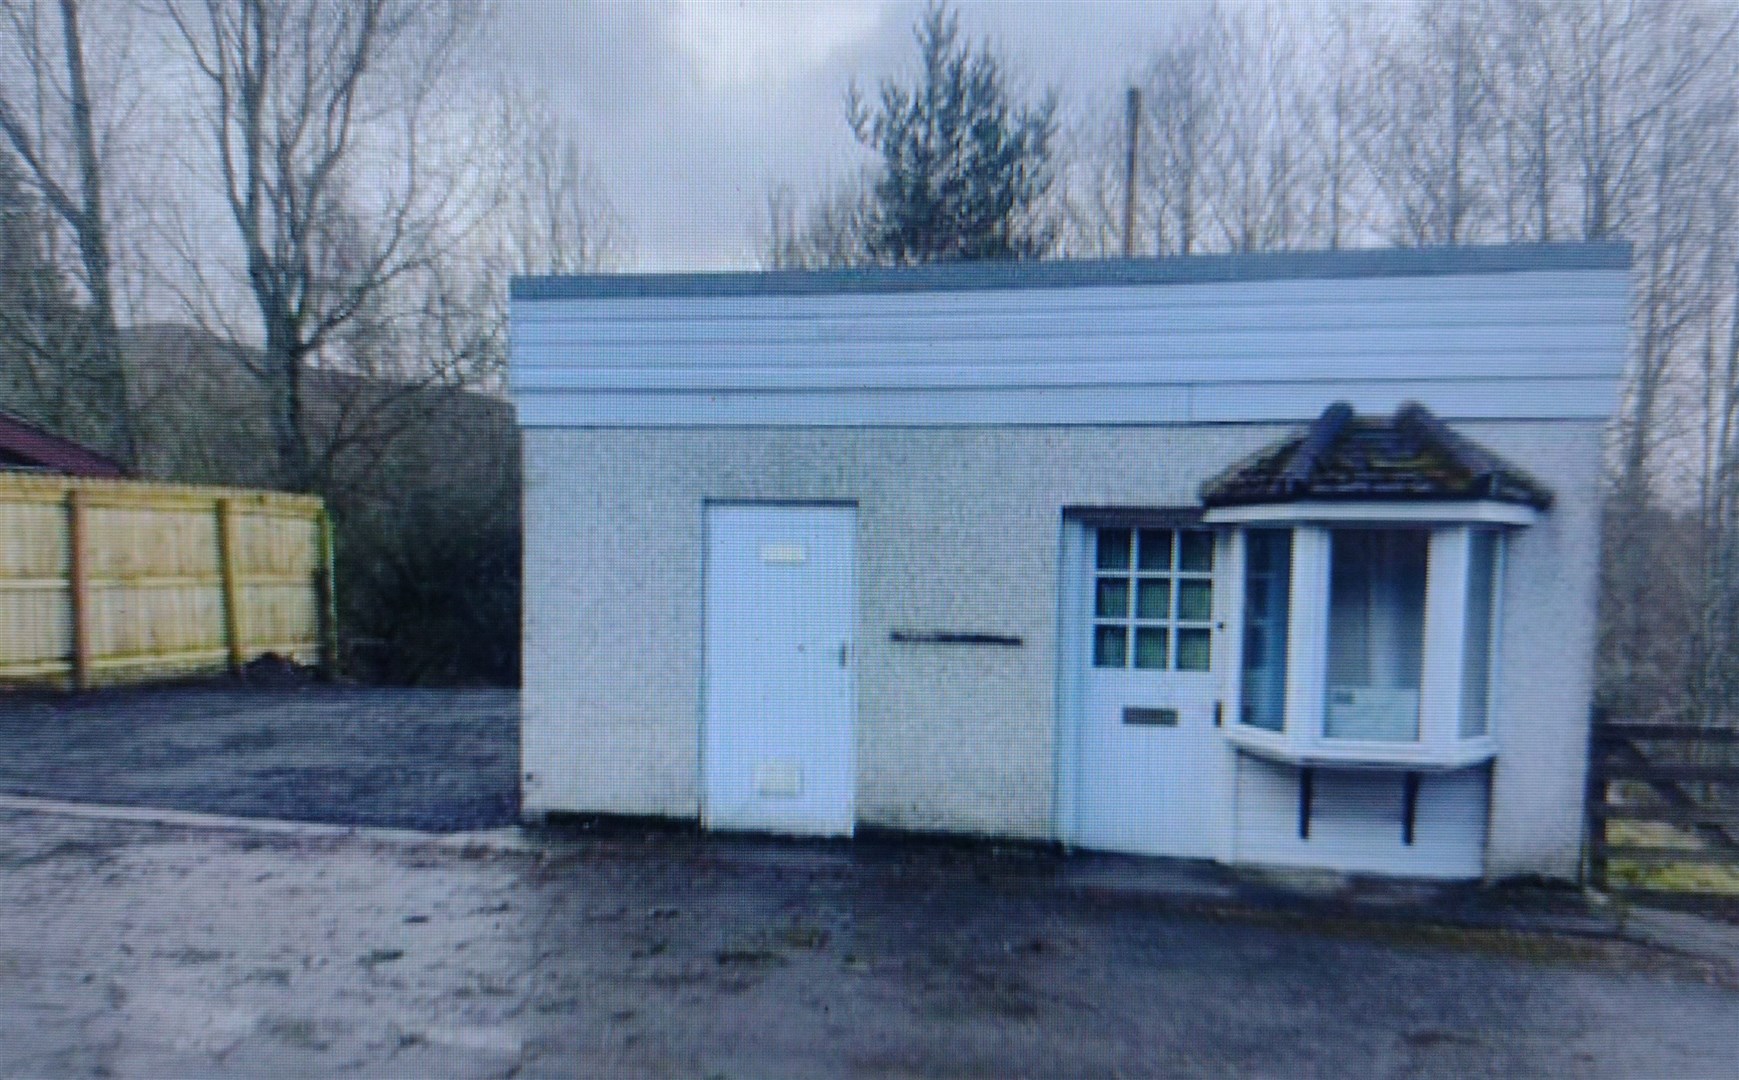 The store at Laggan could become a village shop.